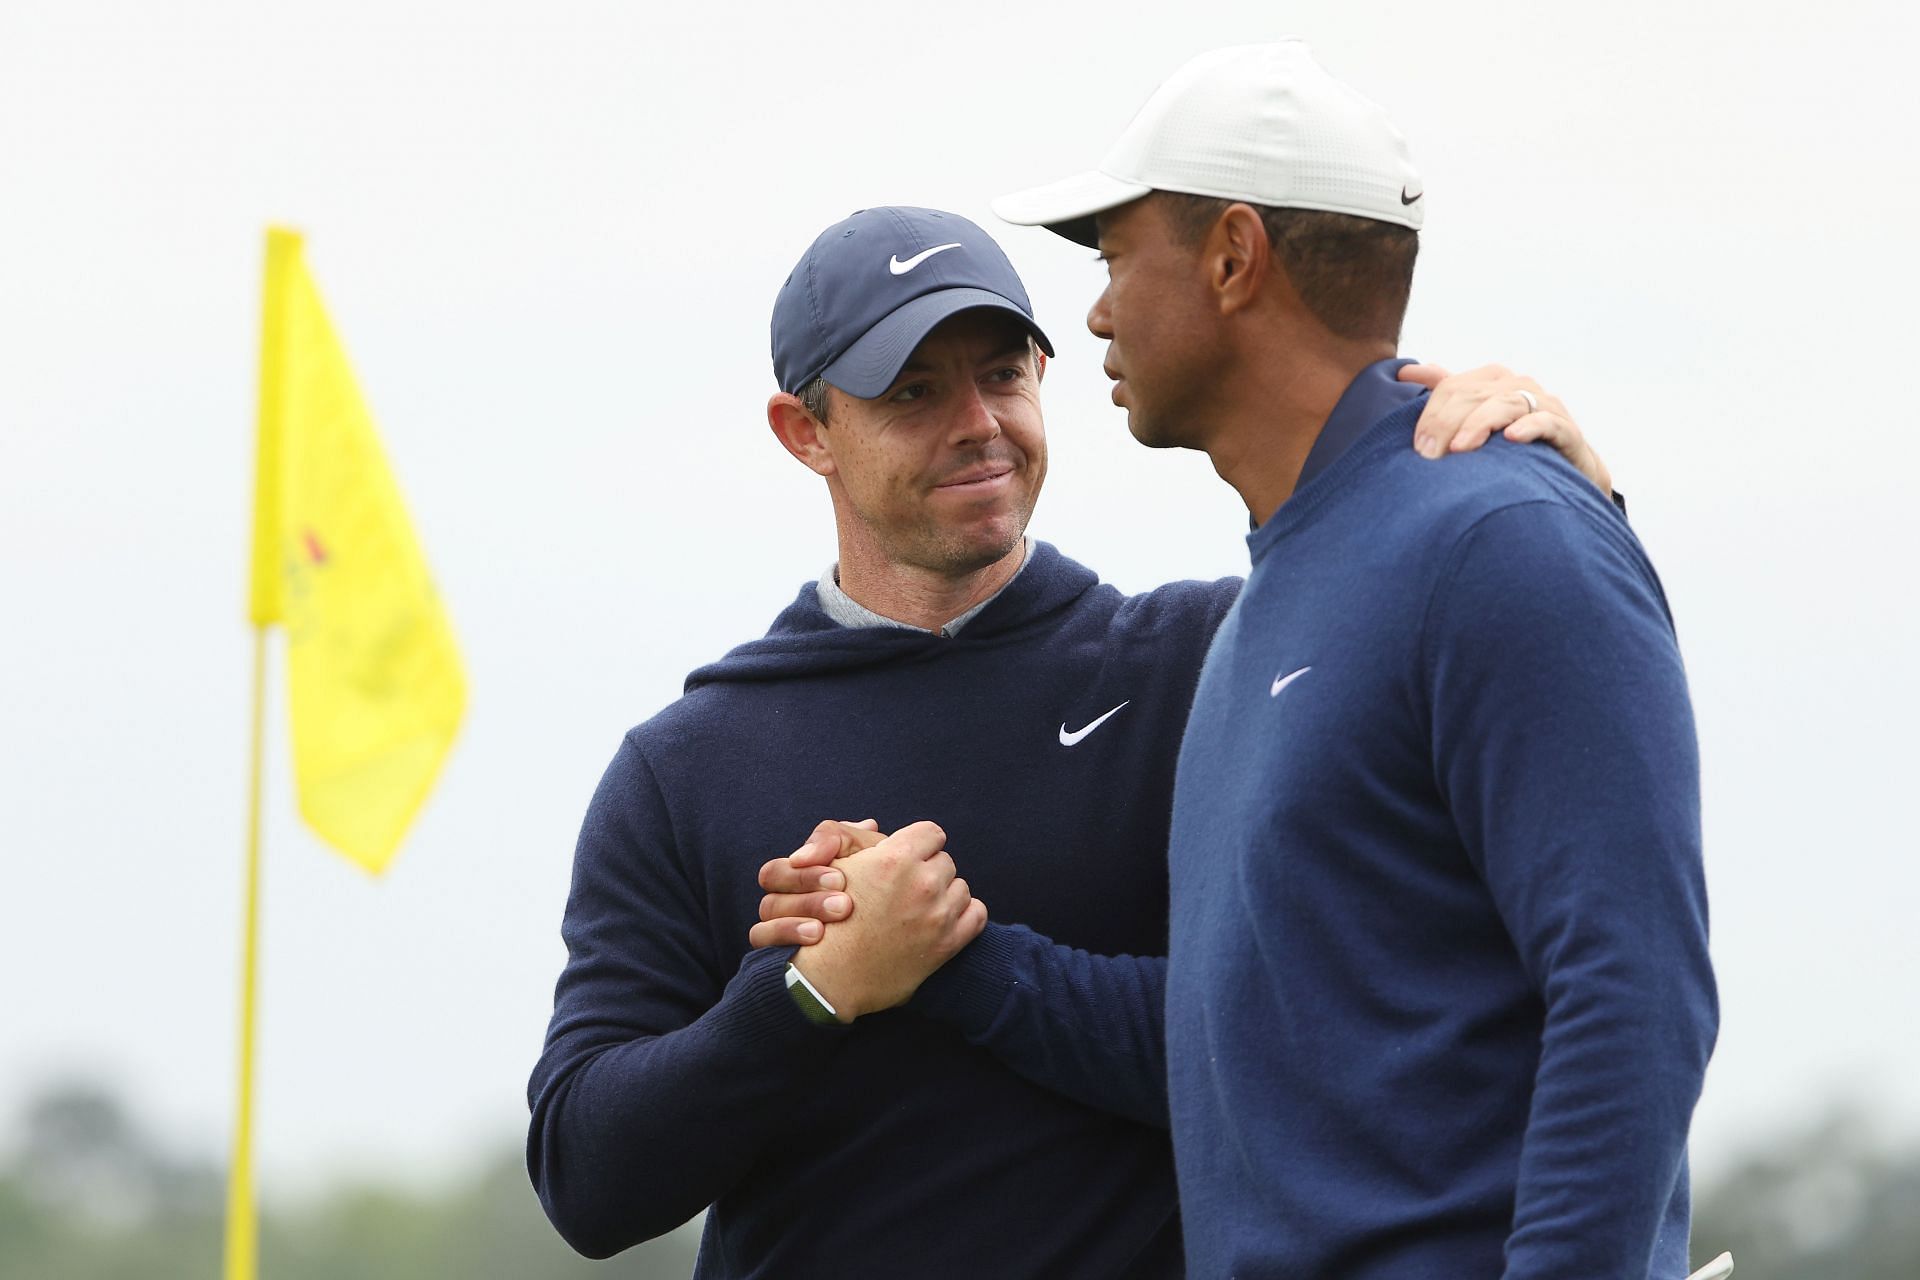 LIV Golf wanted Rory McIlroy and Tiger Woods